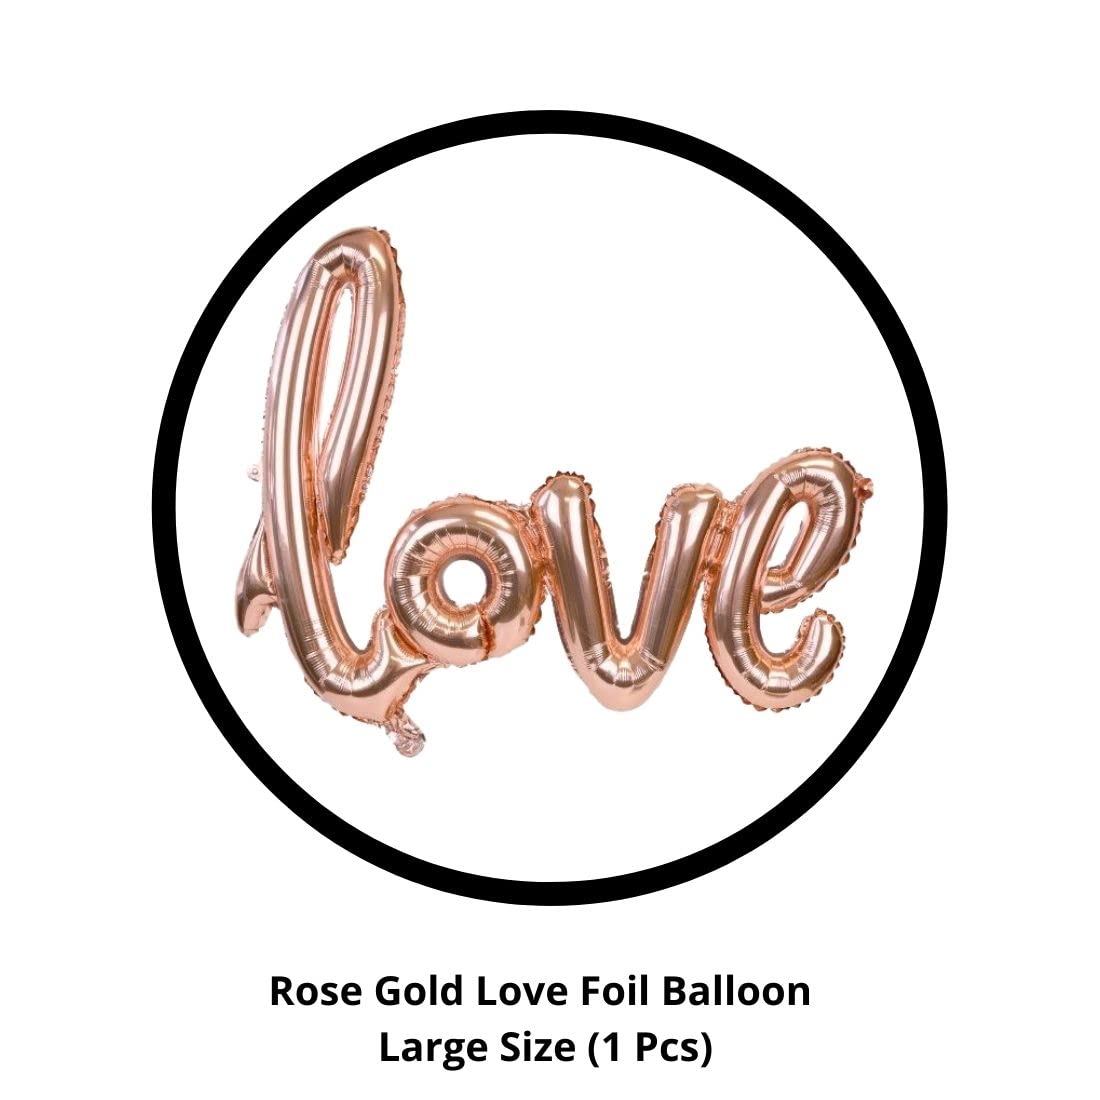 Love Shape Letter Foil Balloon with Rose Gold Confetti and Rose Gold Metallic Balloons for Birthday Wedding Valentine’s Day (21 piece)